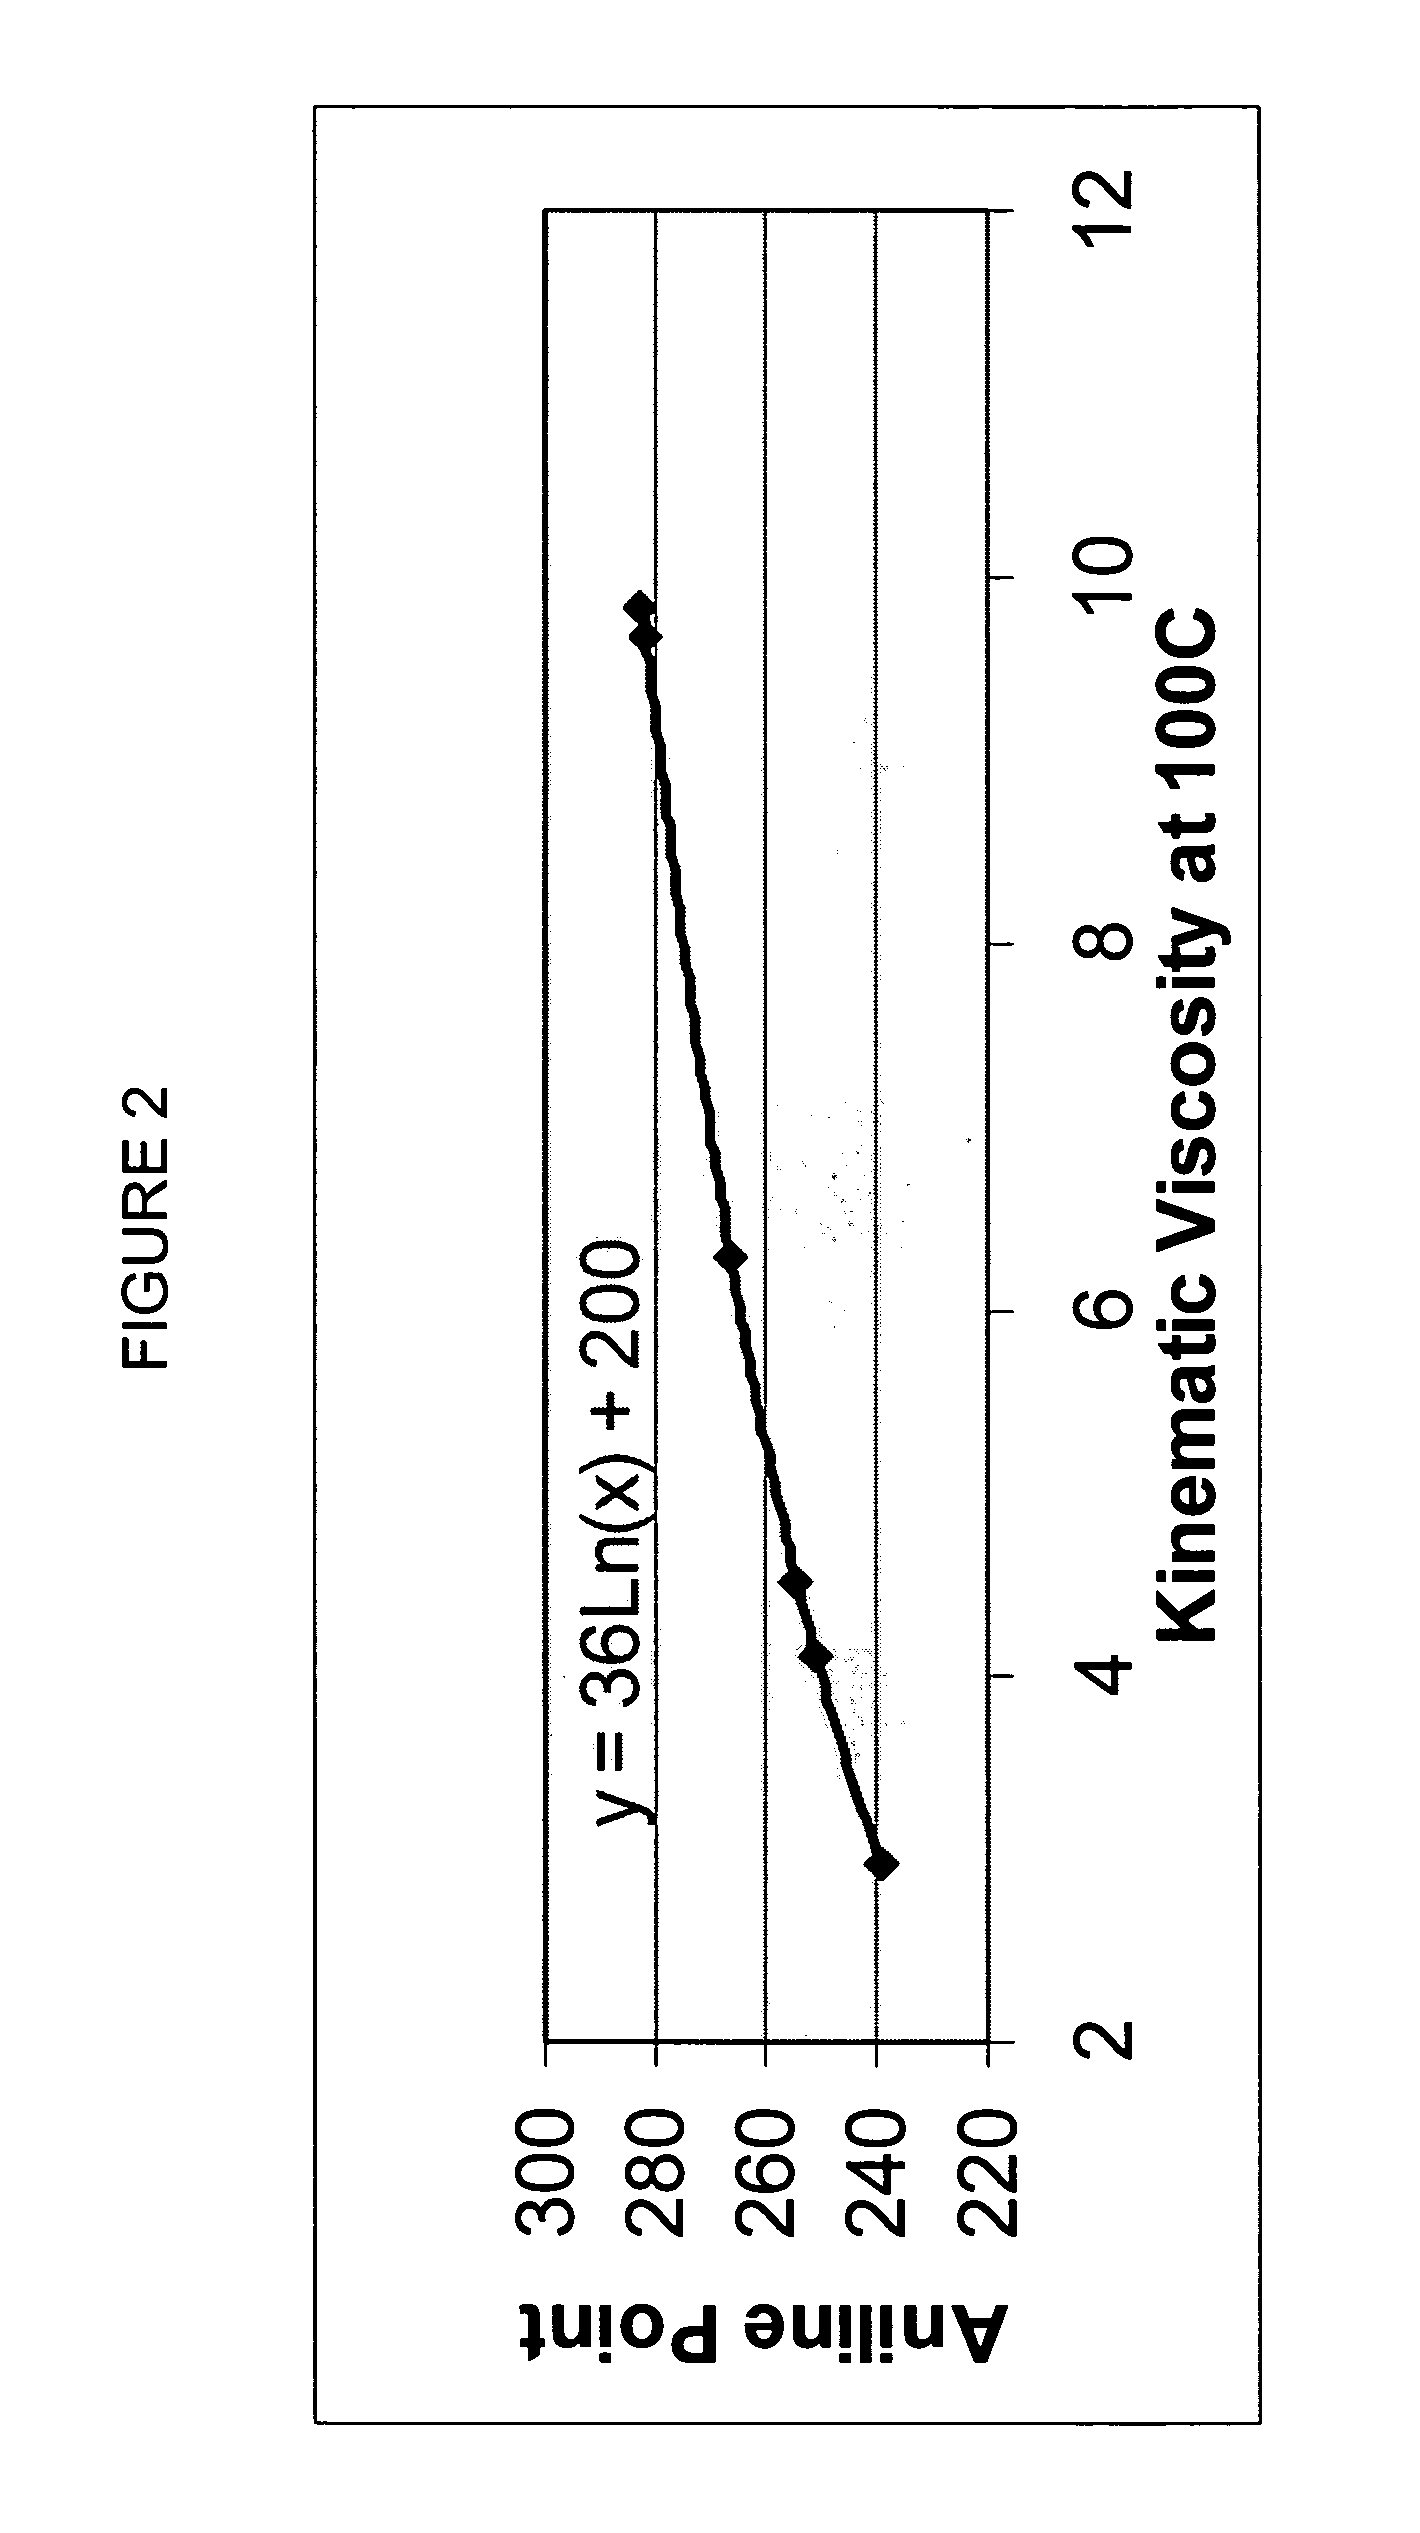 Composition of lubricating base oil with high monocycloparaffins and low multicycloparaffins